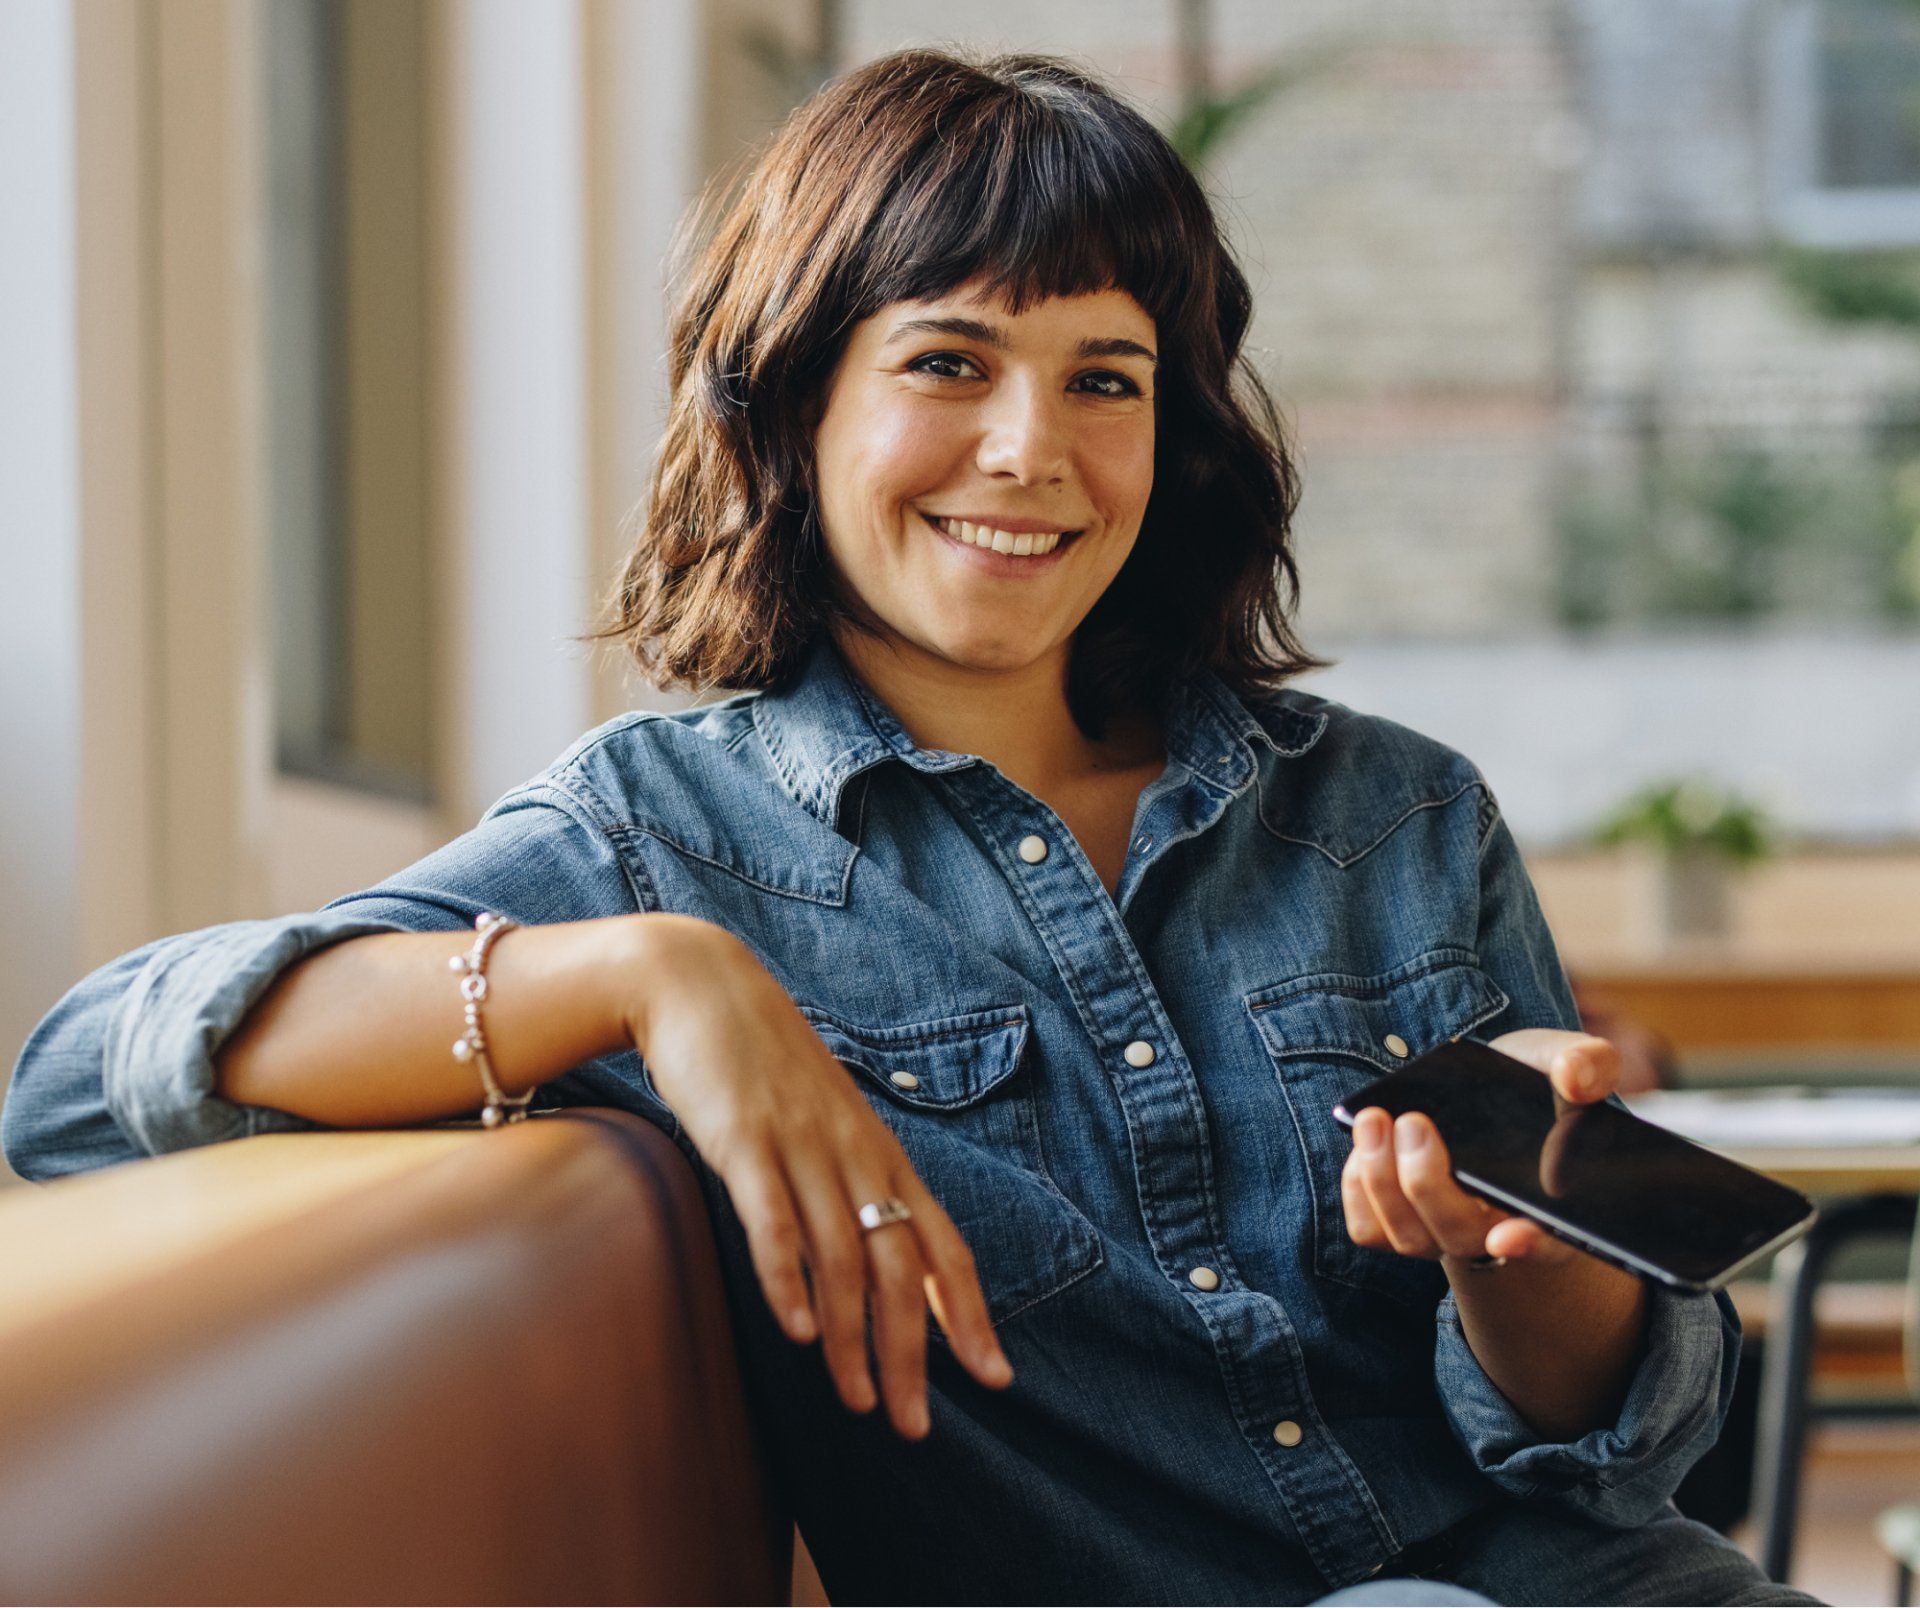 A woman sitting on a couch with her phone smiling 